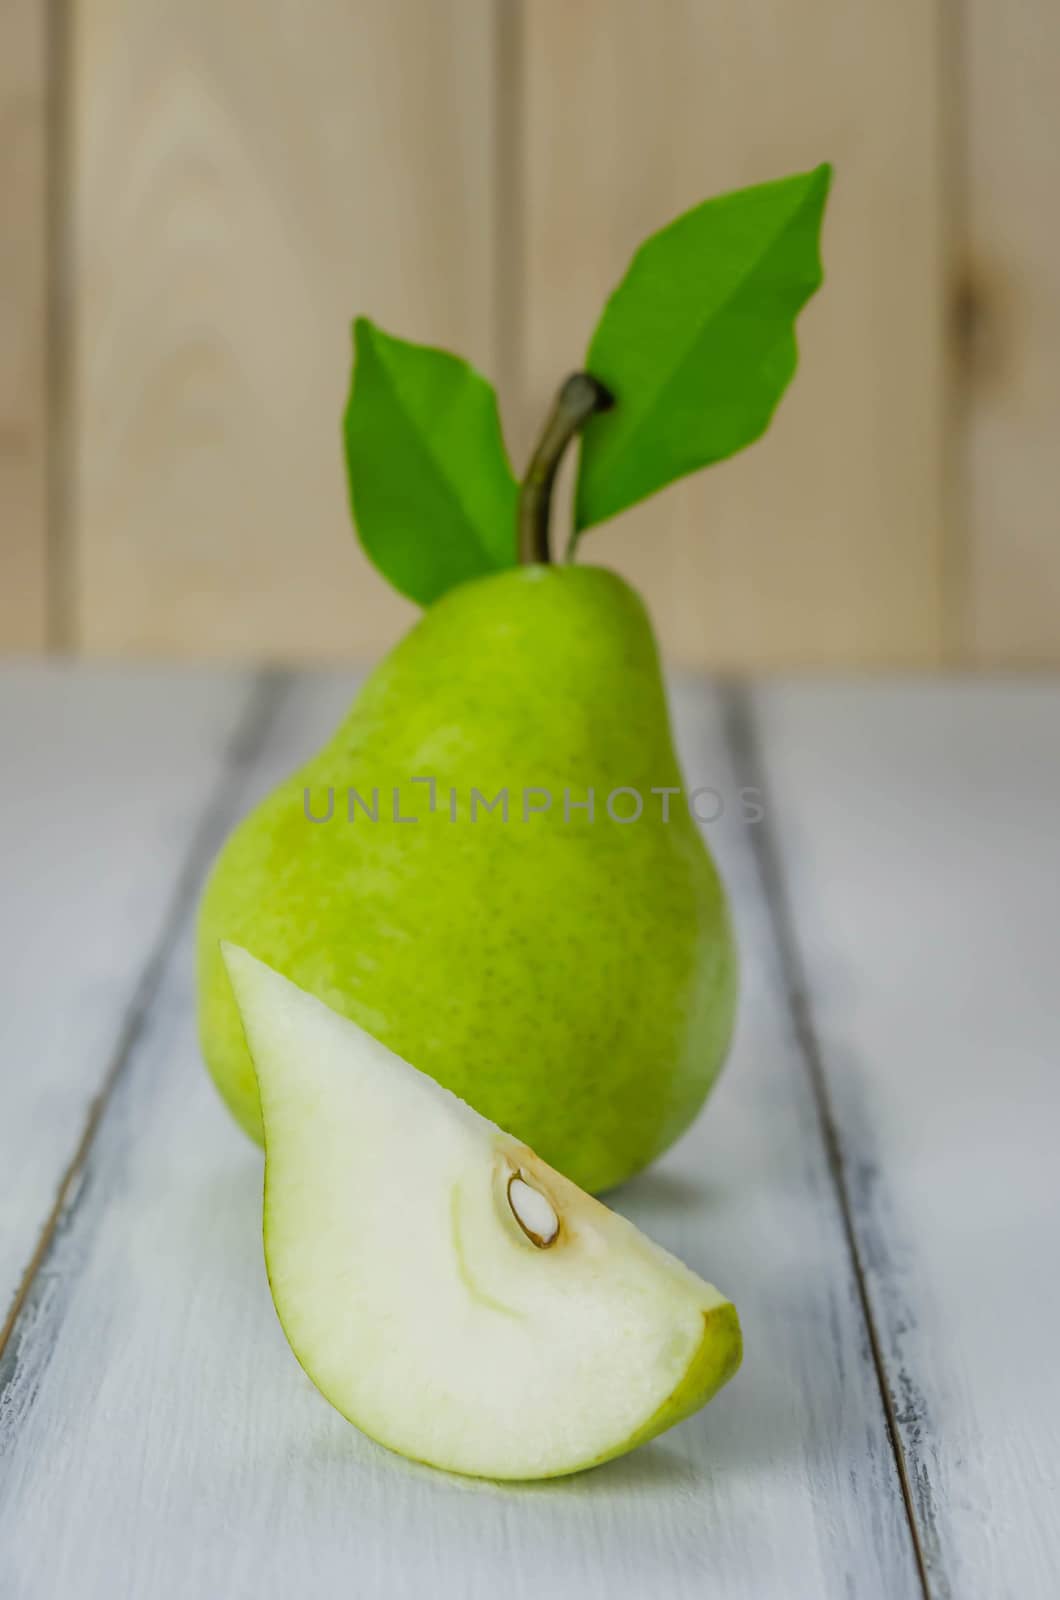 One and a slice green pears over white background